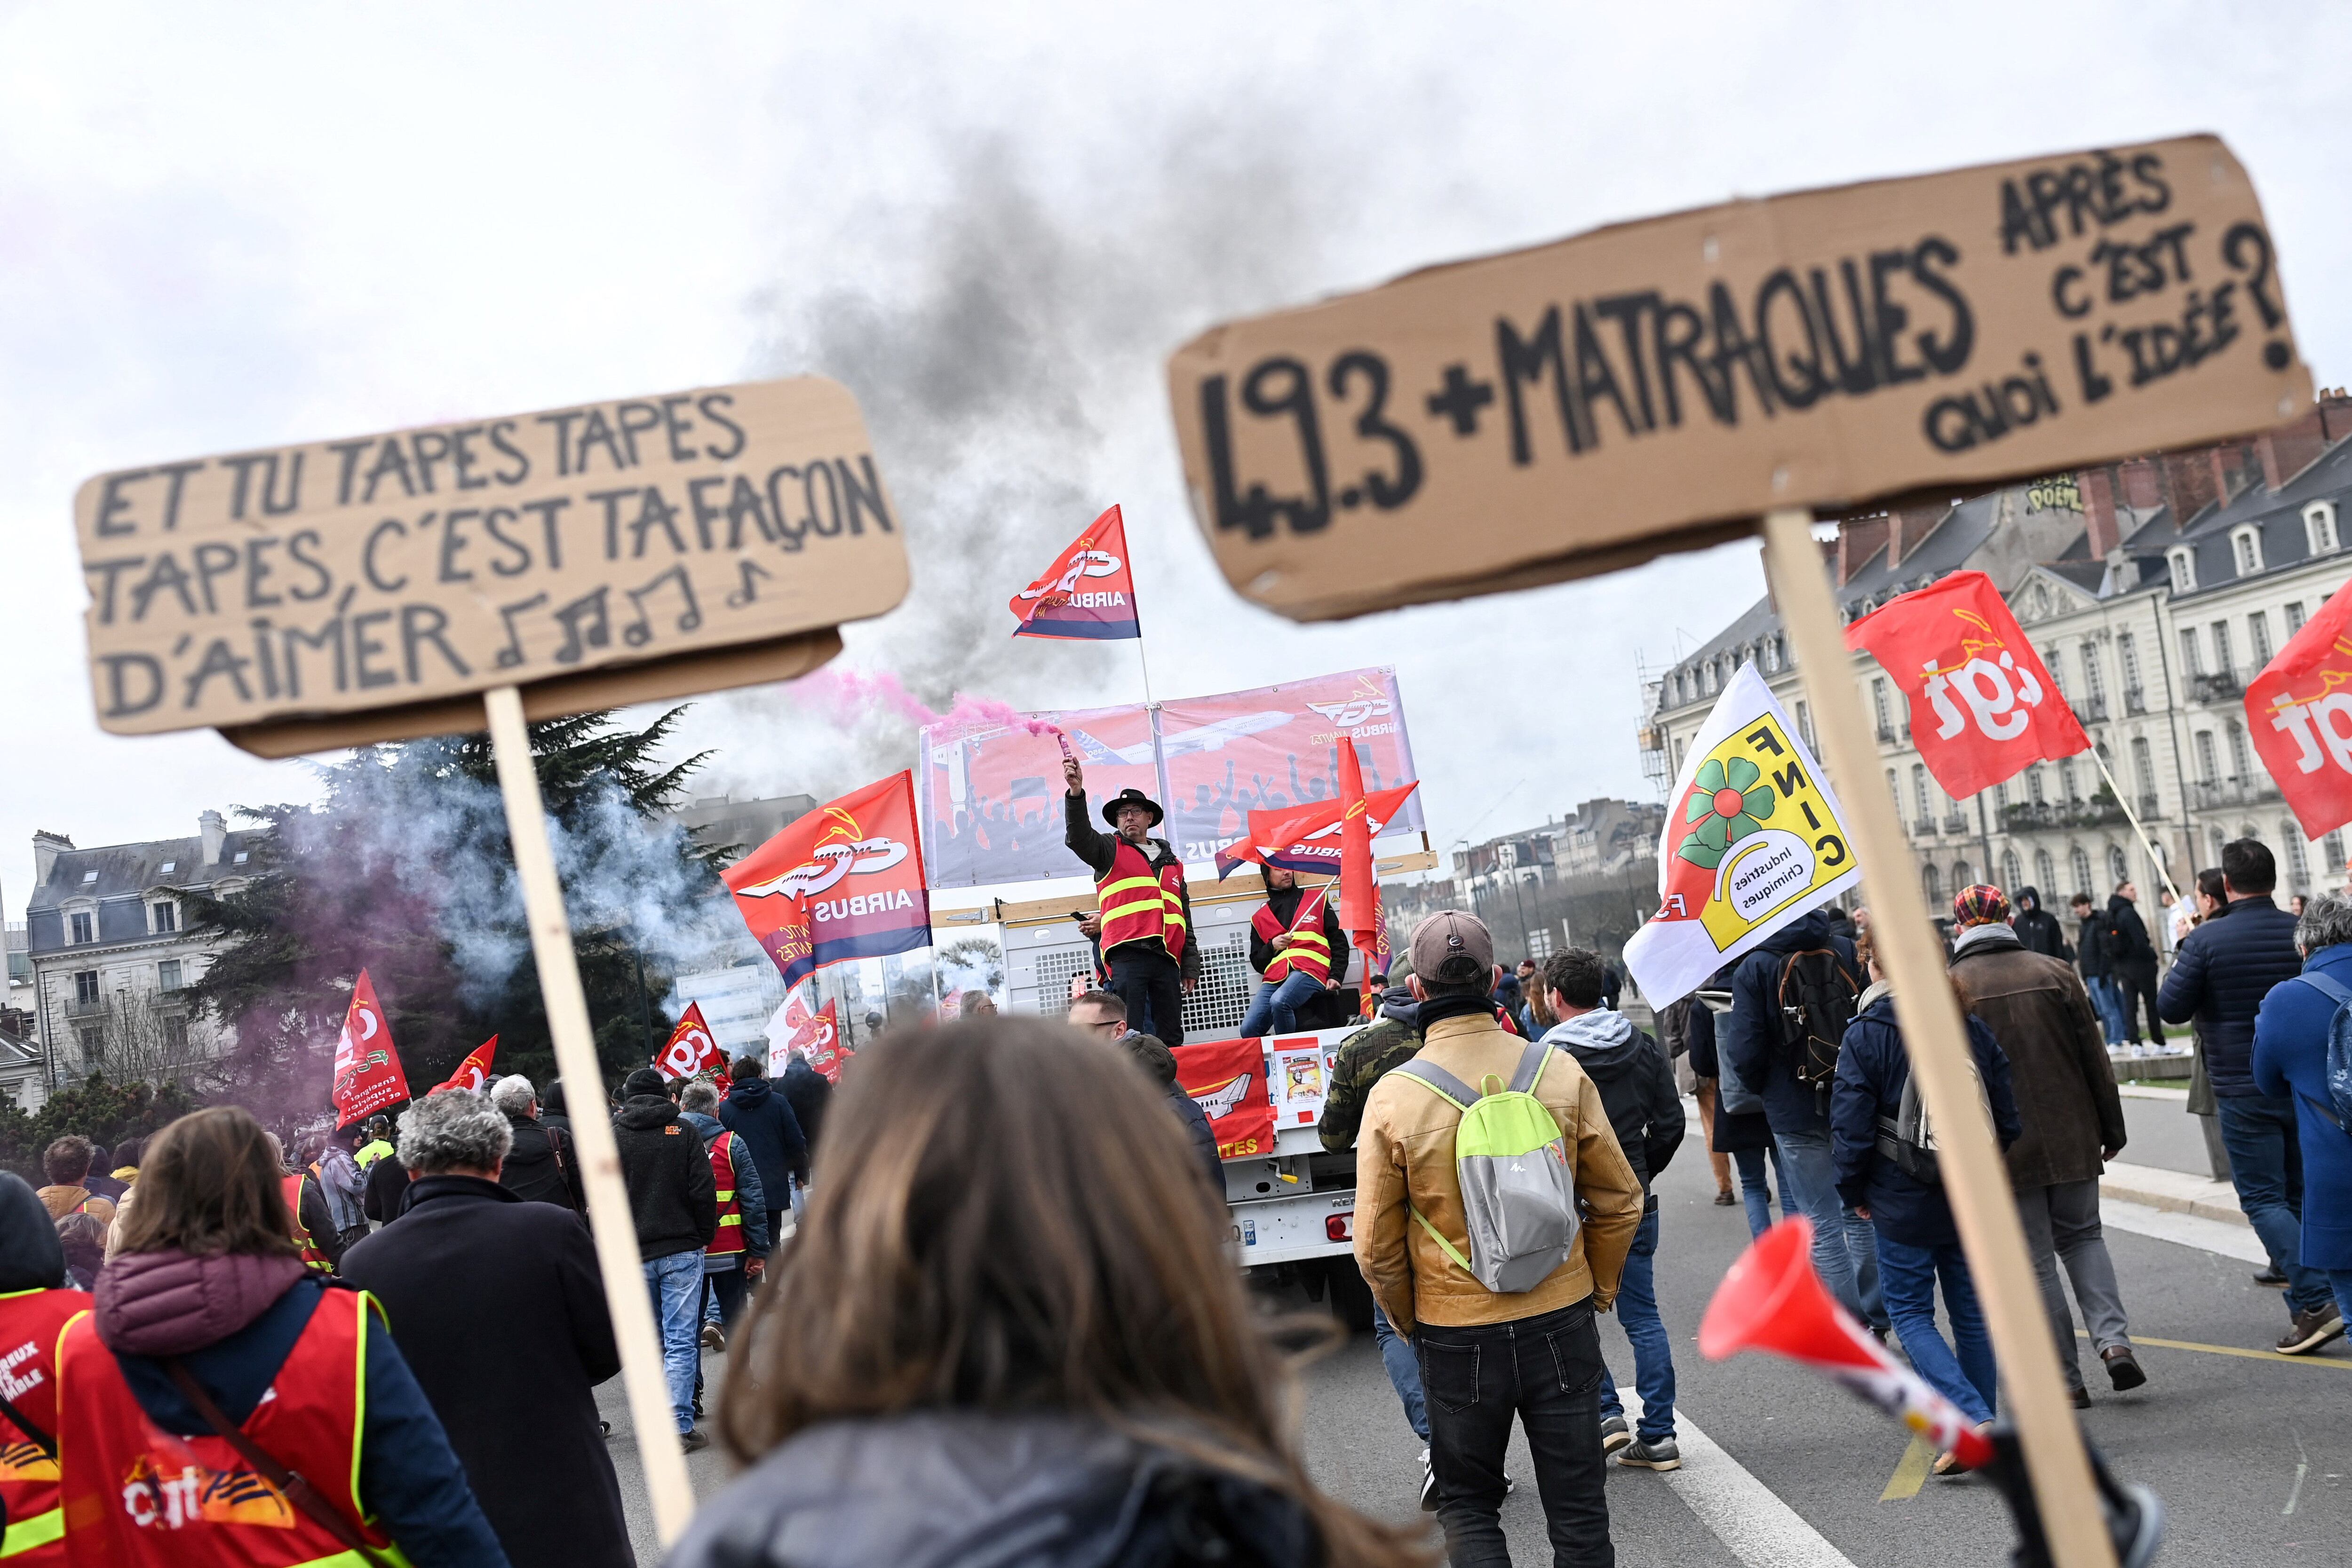 People take part in a demonstration after the government pushed a pension reform through parliament without a vote, using article 49.3 of the constitution, in Nantes, western France, on March 28, 2023. (Photo by Sebastien SALOM -GOMIS / AFP)